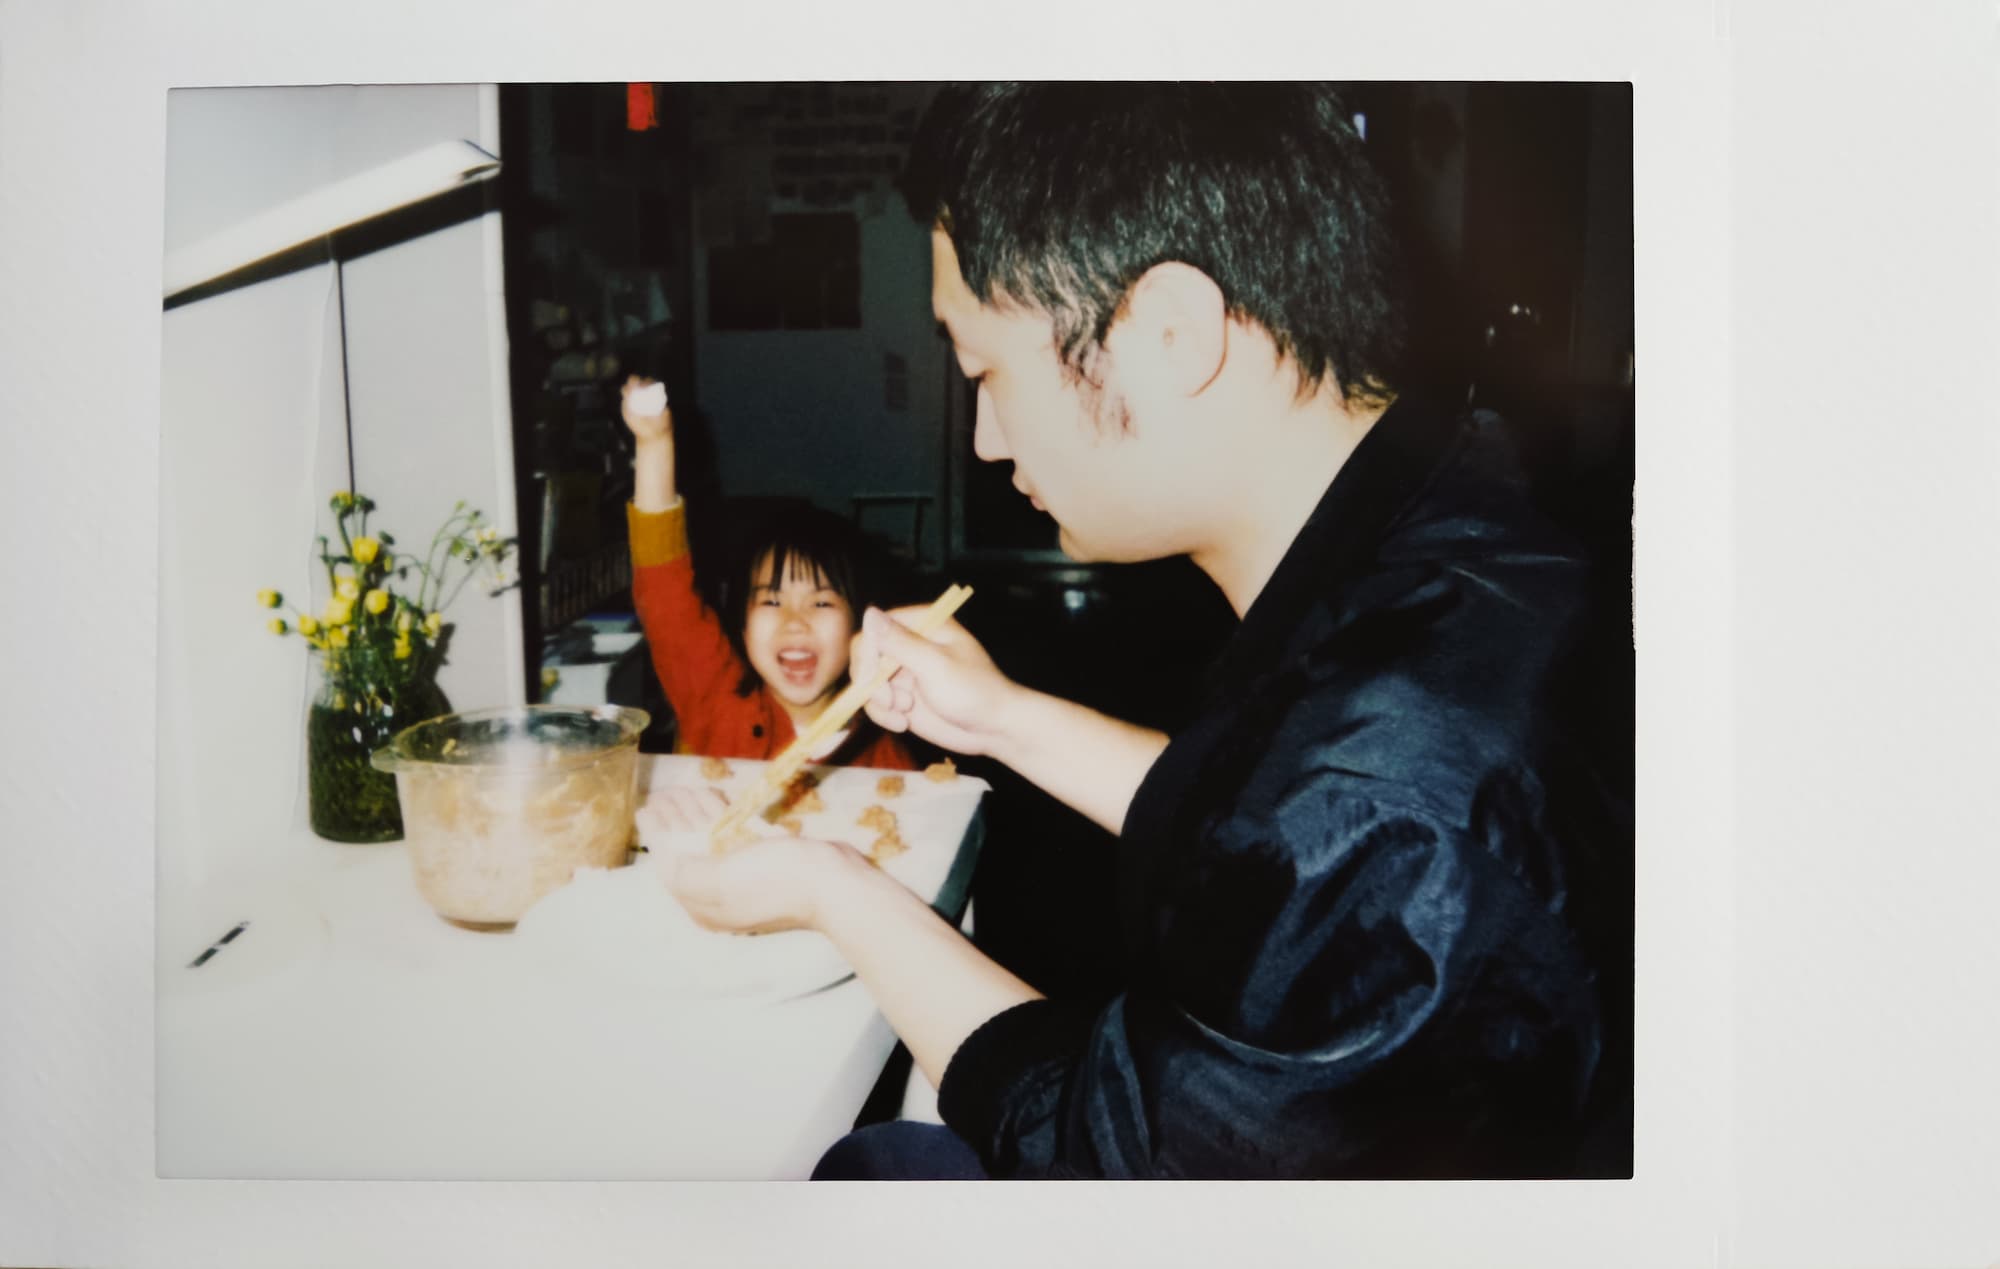 Asian father and 4-year-old daughter together in the home to make dumplings, the baby proudly held up her own dumplings